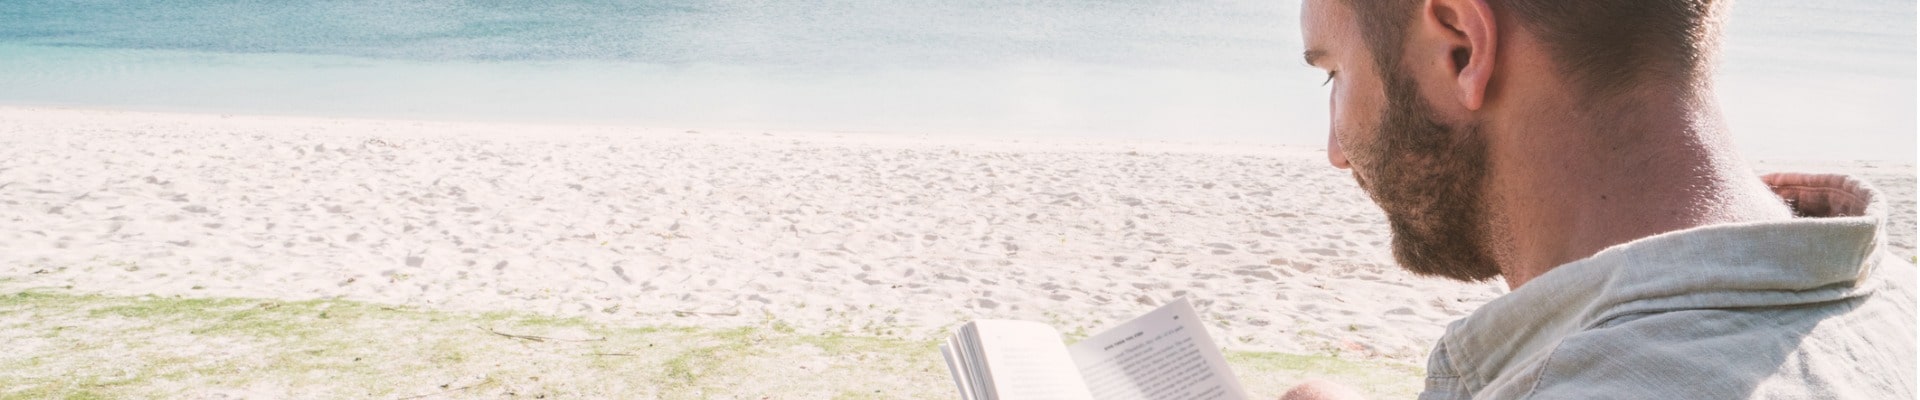 Top 5 Beach Reads for Teachers and TAs this summer